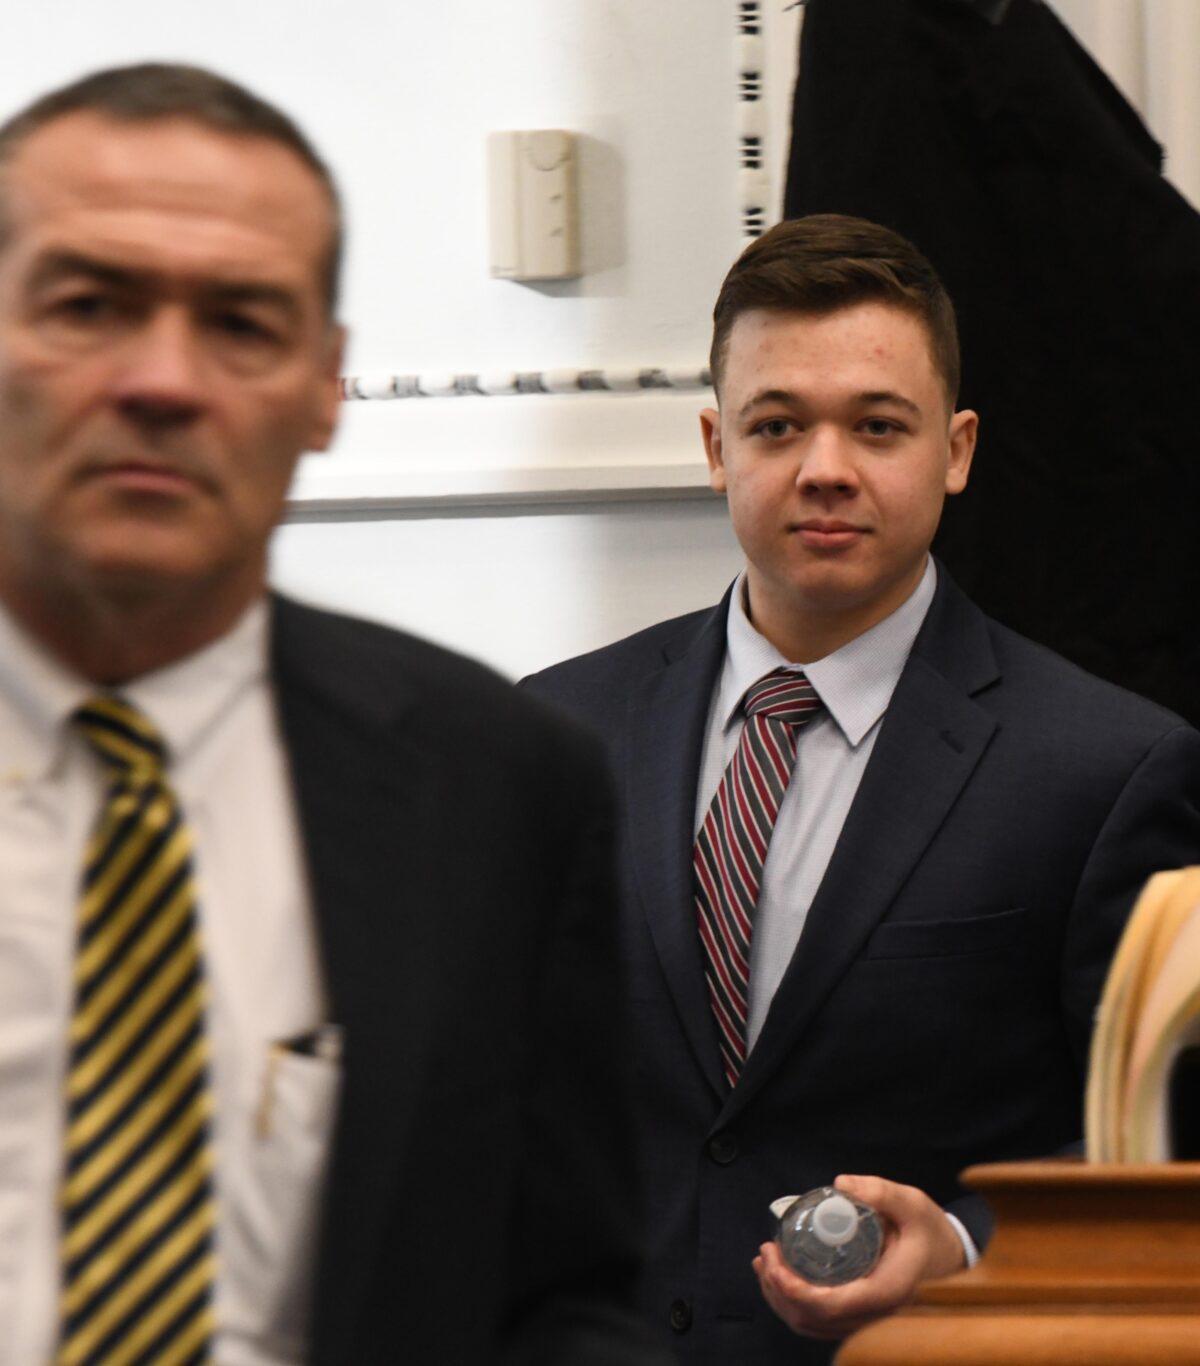 Kyle Rittenhouse and lead defense attorney Mark Richards arrive for his trial at the Kenosha County Courthouse in Kenosha, Wis., on Nov. 8, 2021. (Mark Hertzberg/Pool/Getty Images)